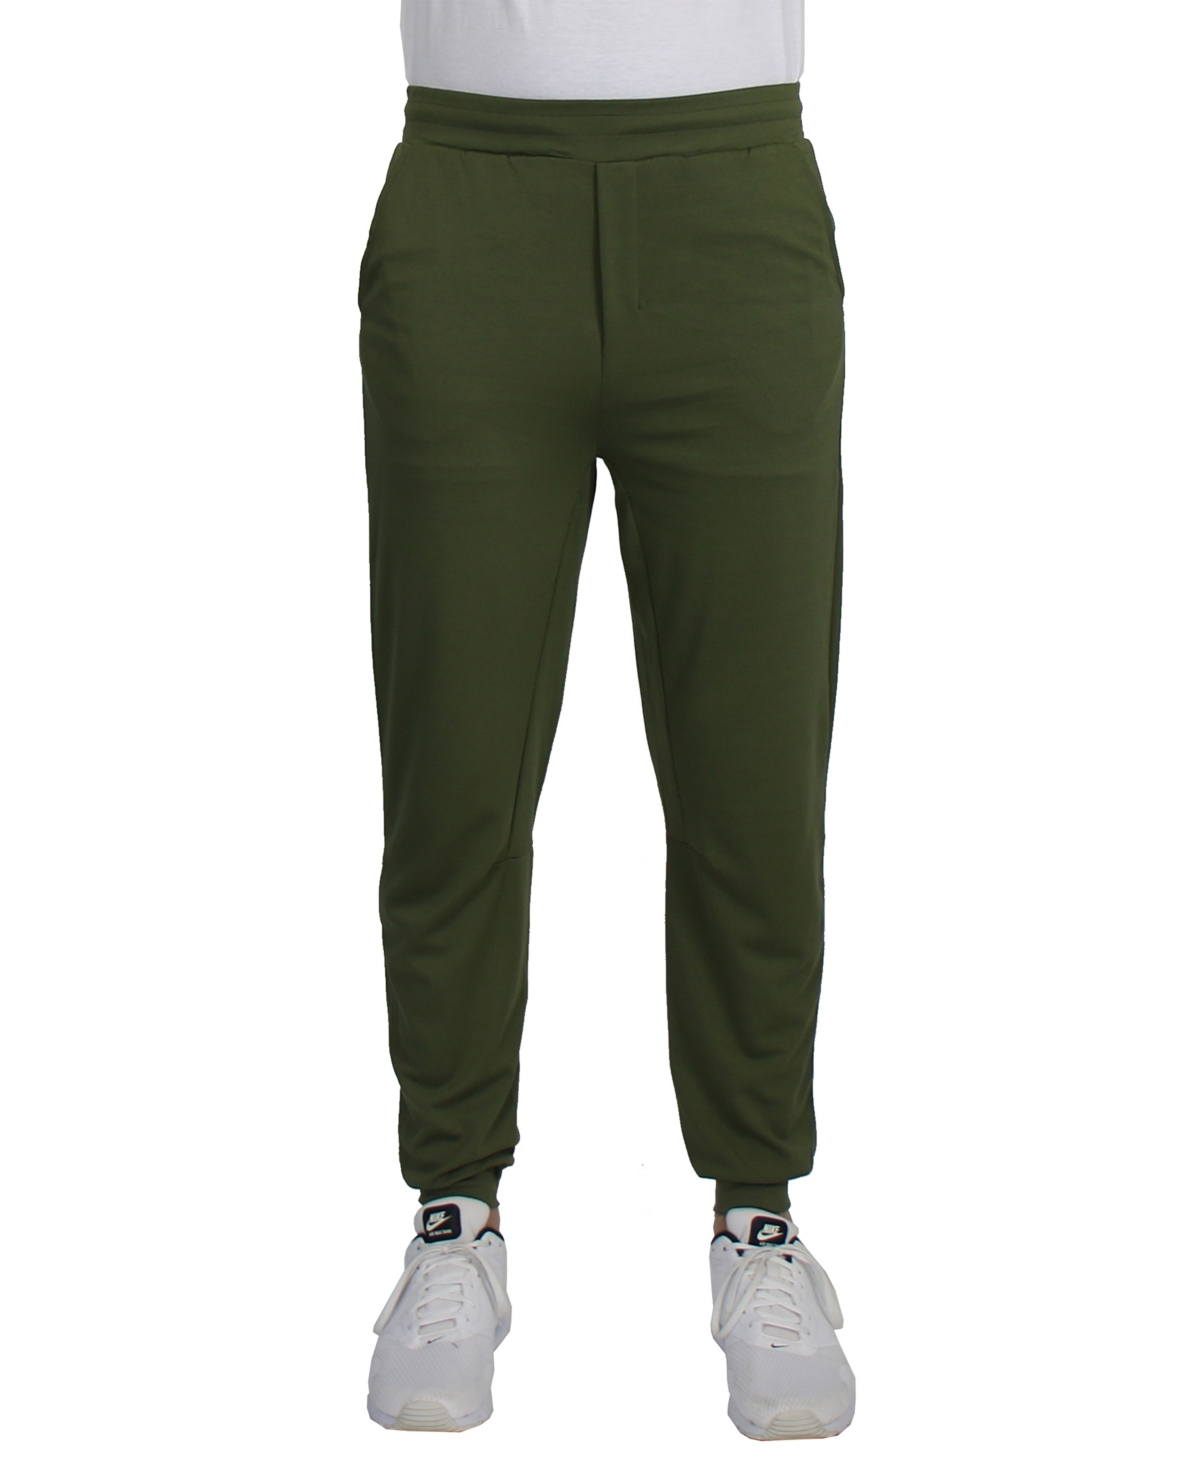 Blue Ice Men's Moisture Wicking Performance Classic Jogger Sweatpants In Olive